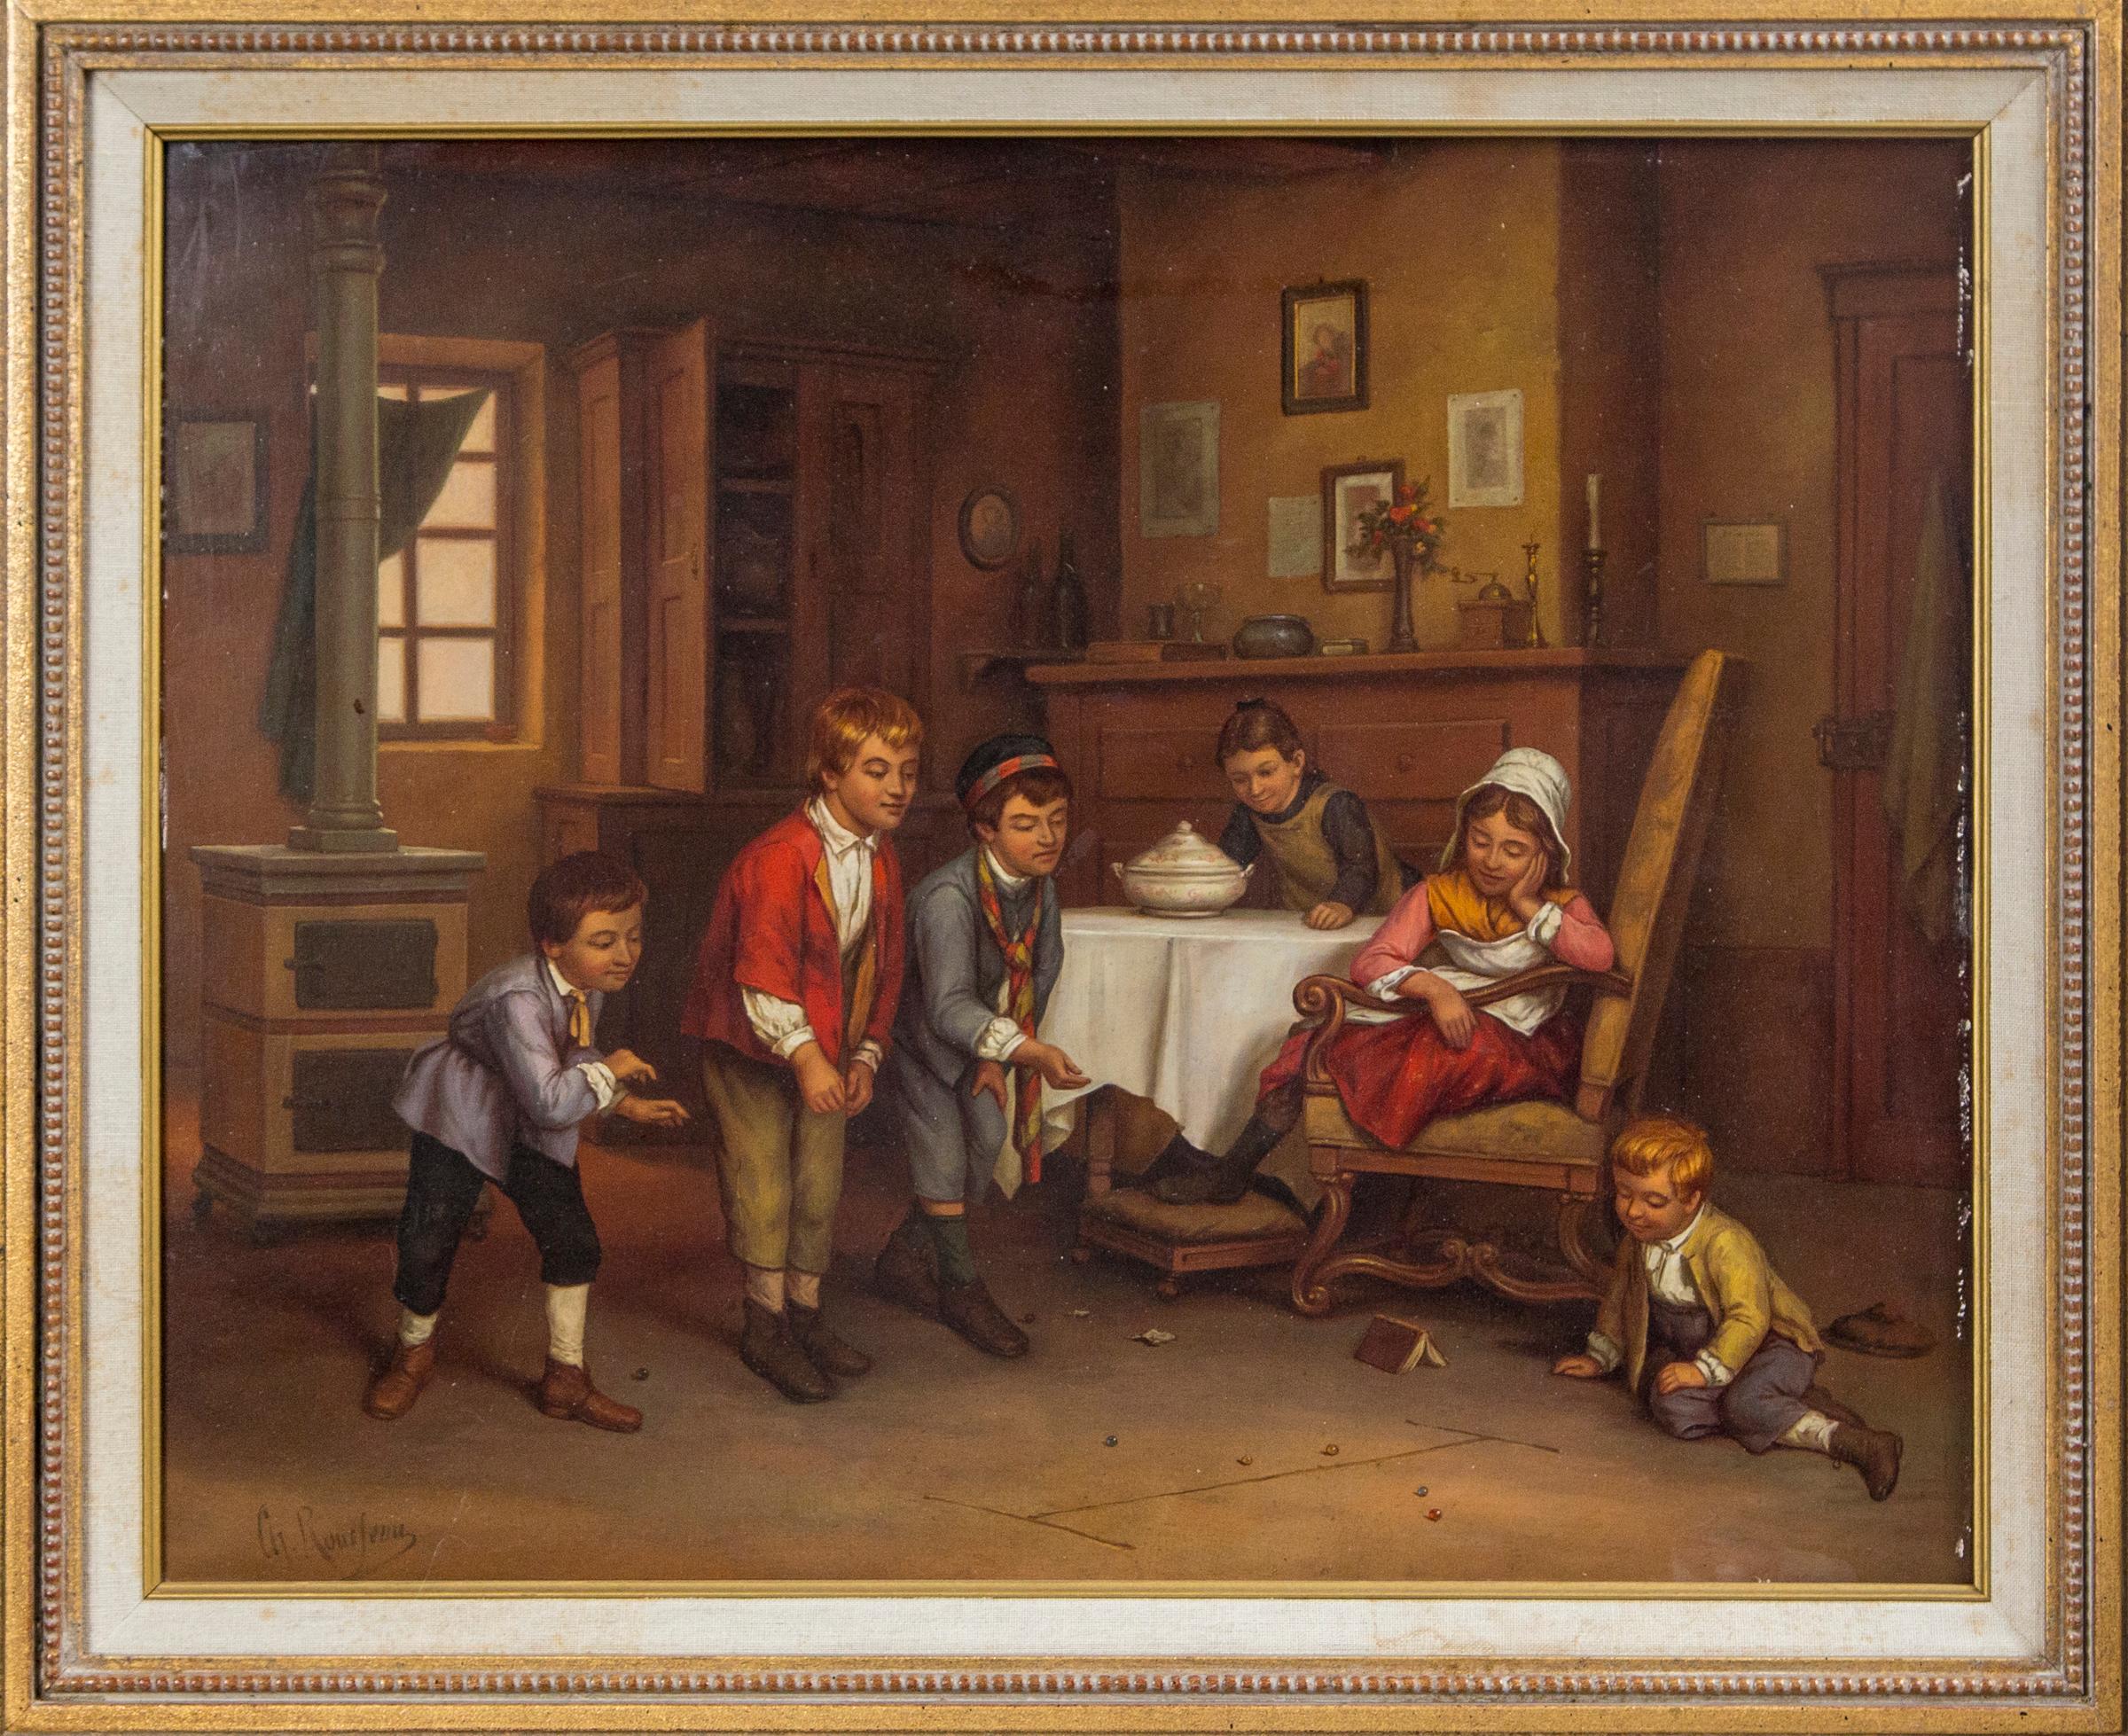 Six children playing marbles in a dark interior. Painted on board and signed lower left Ch Rousseau (Charles Rousseau Belgium 1862-1916). Measurements are the frame size. Label on the back of the panel Watkins & Deal
fine art specialists, picture